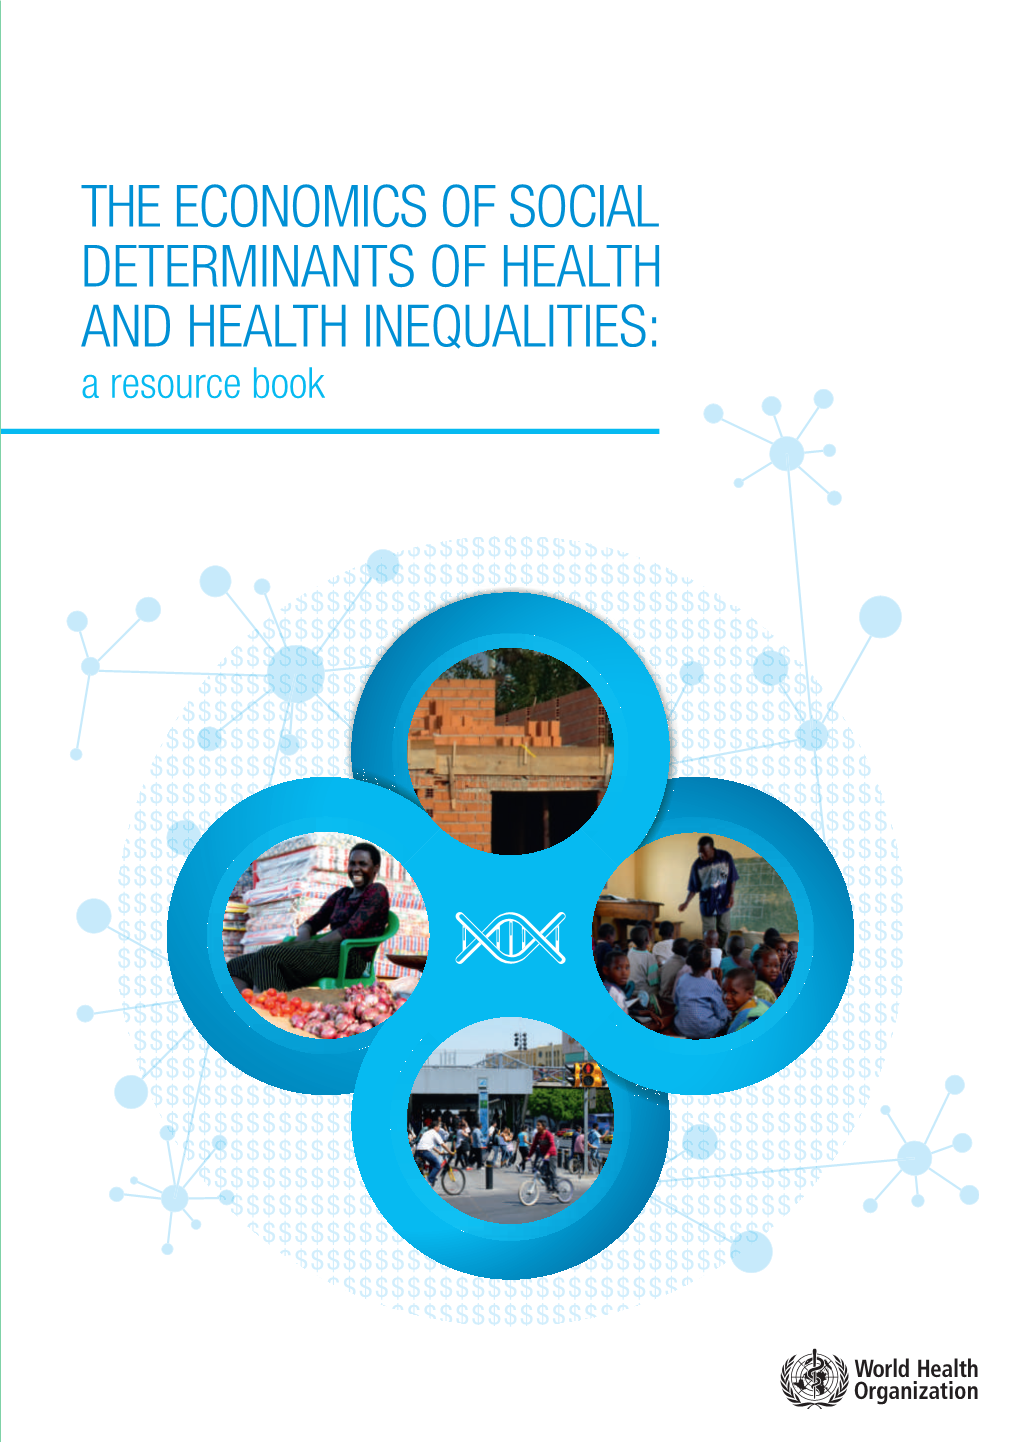 The Economics of the Social Determinants of Health and Health Inequalities: a Resource Book